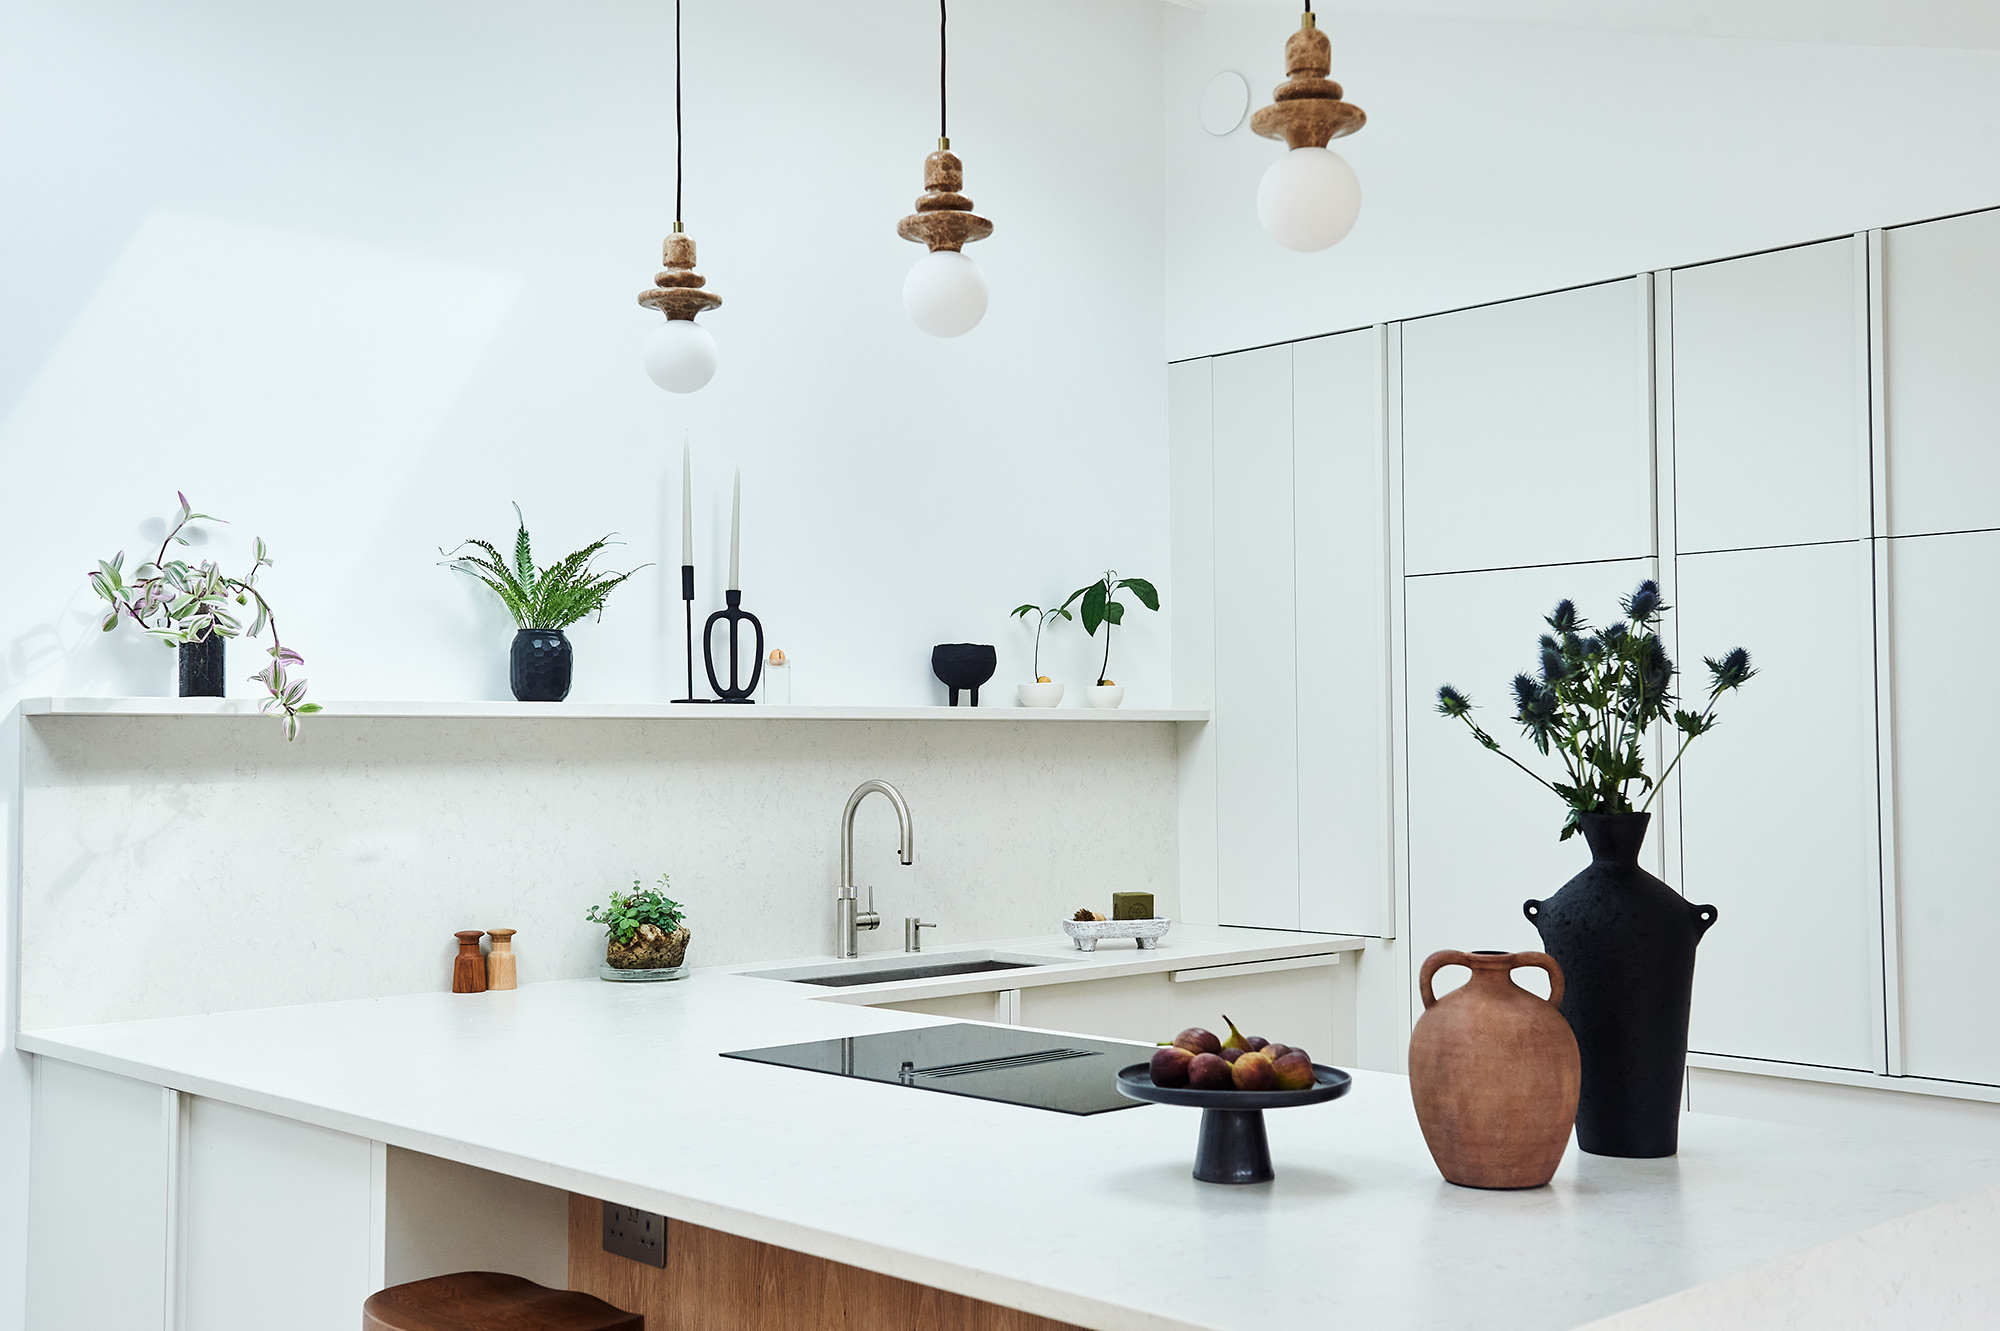 Image of Richmond Residential K Arte Design 3 1 in Influencer Annamaria Väli-Klemelä chose sustainable countertops for her kitchen - Cosentino